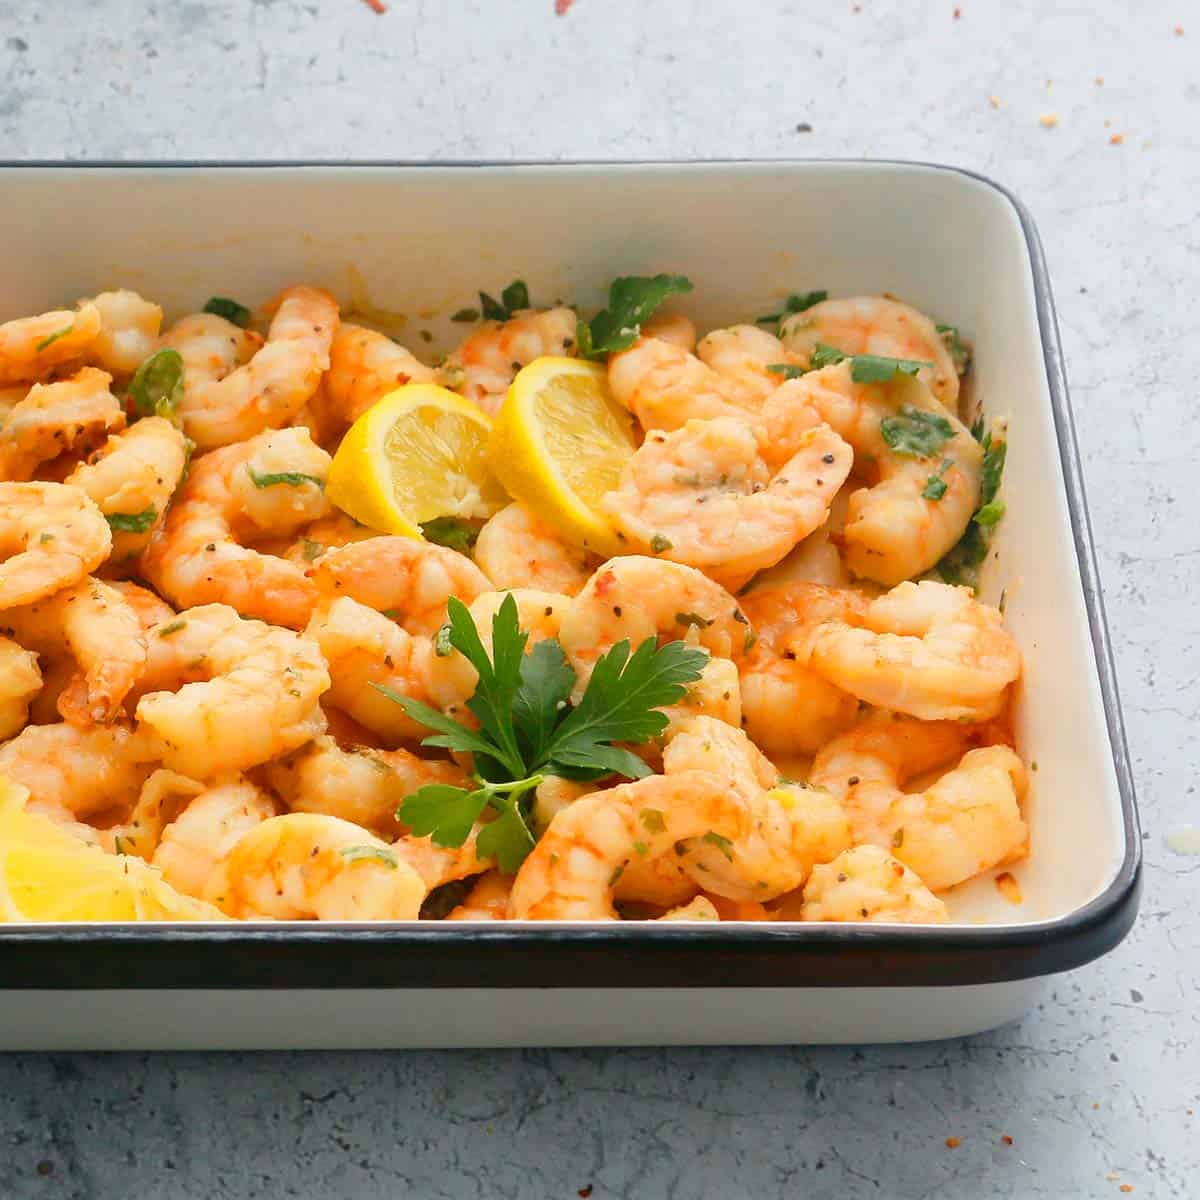 air fryer garlic shrimp placed in a white platter garnished with parsley and lemon wedges